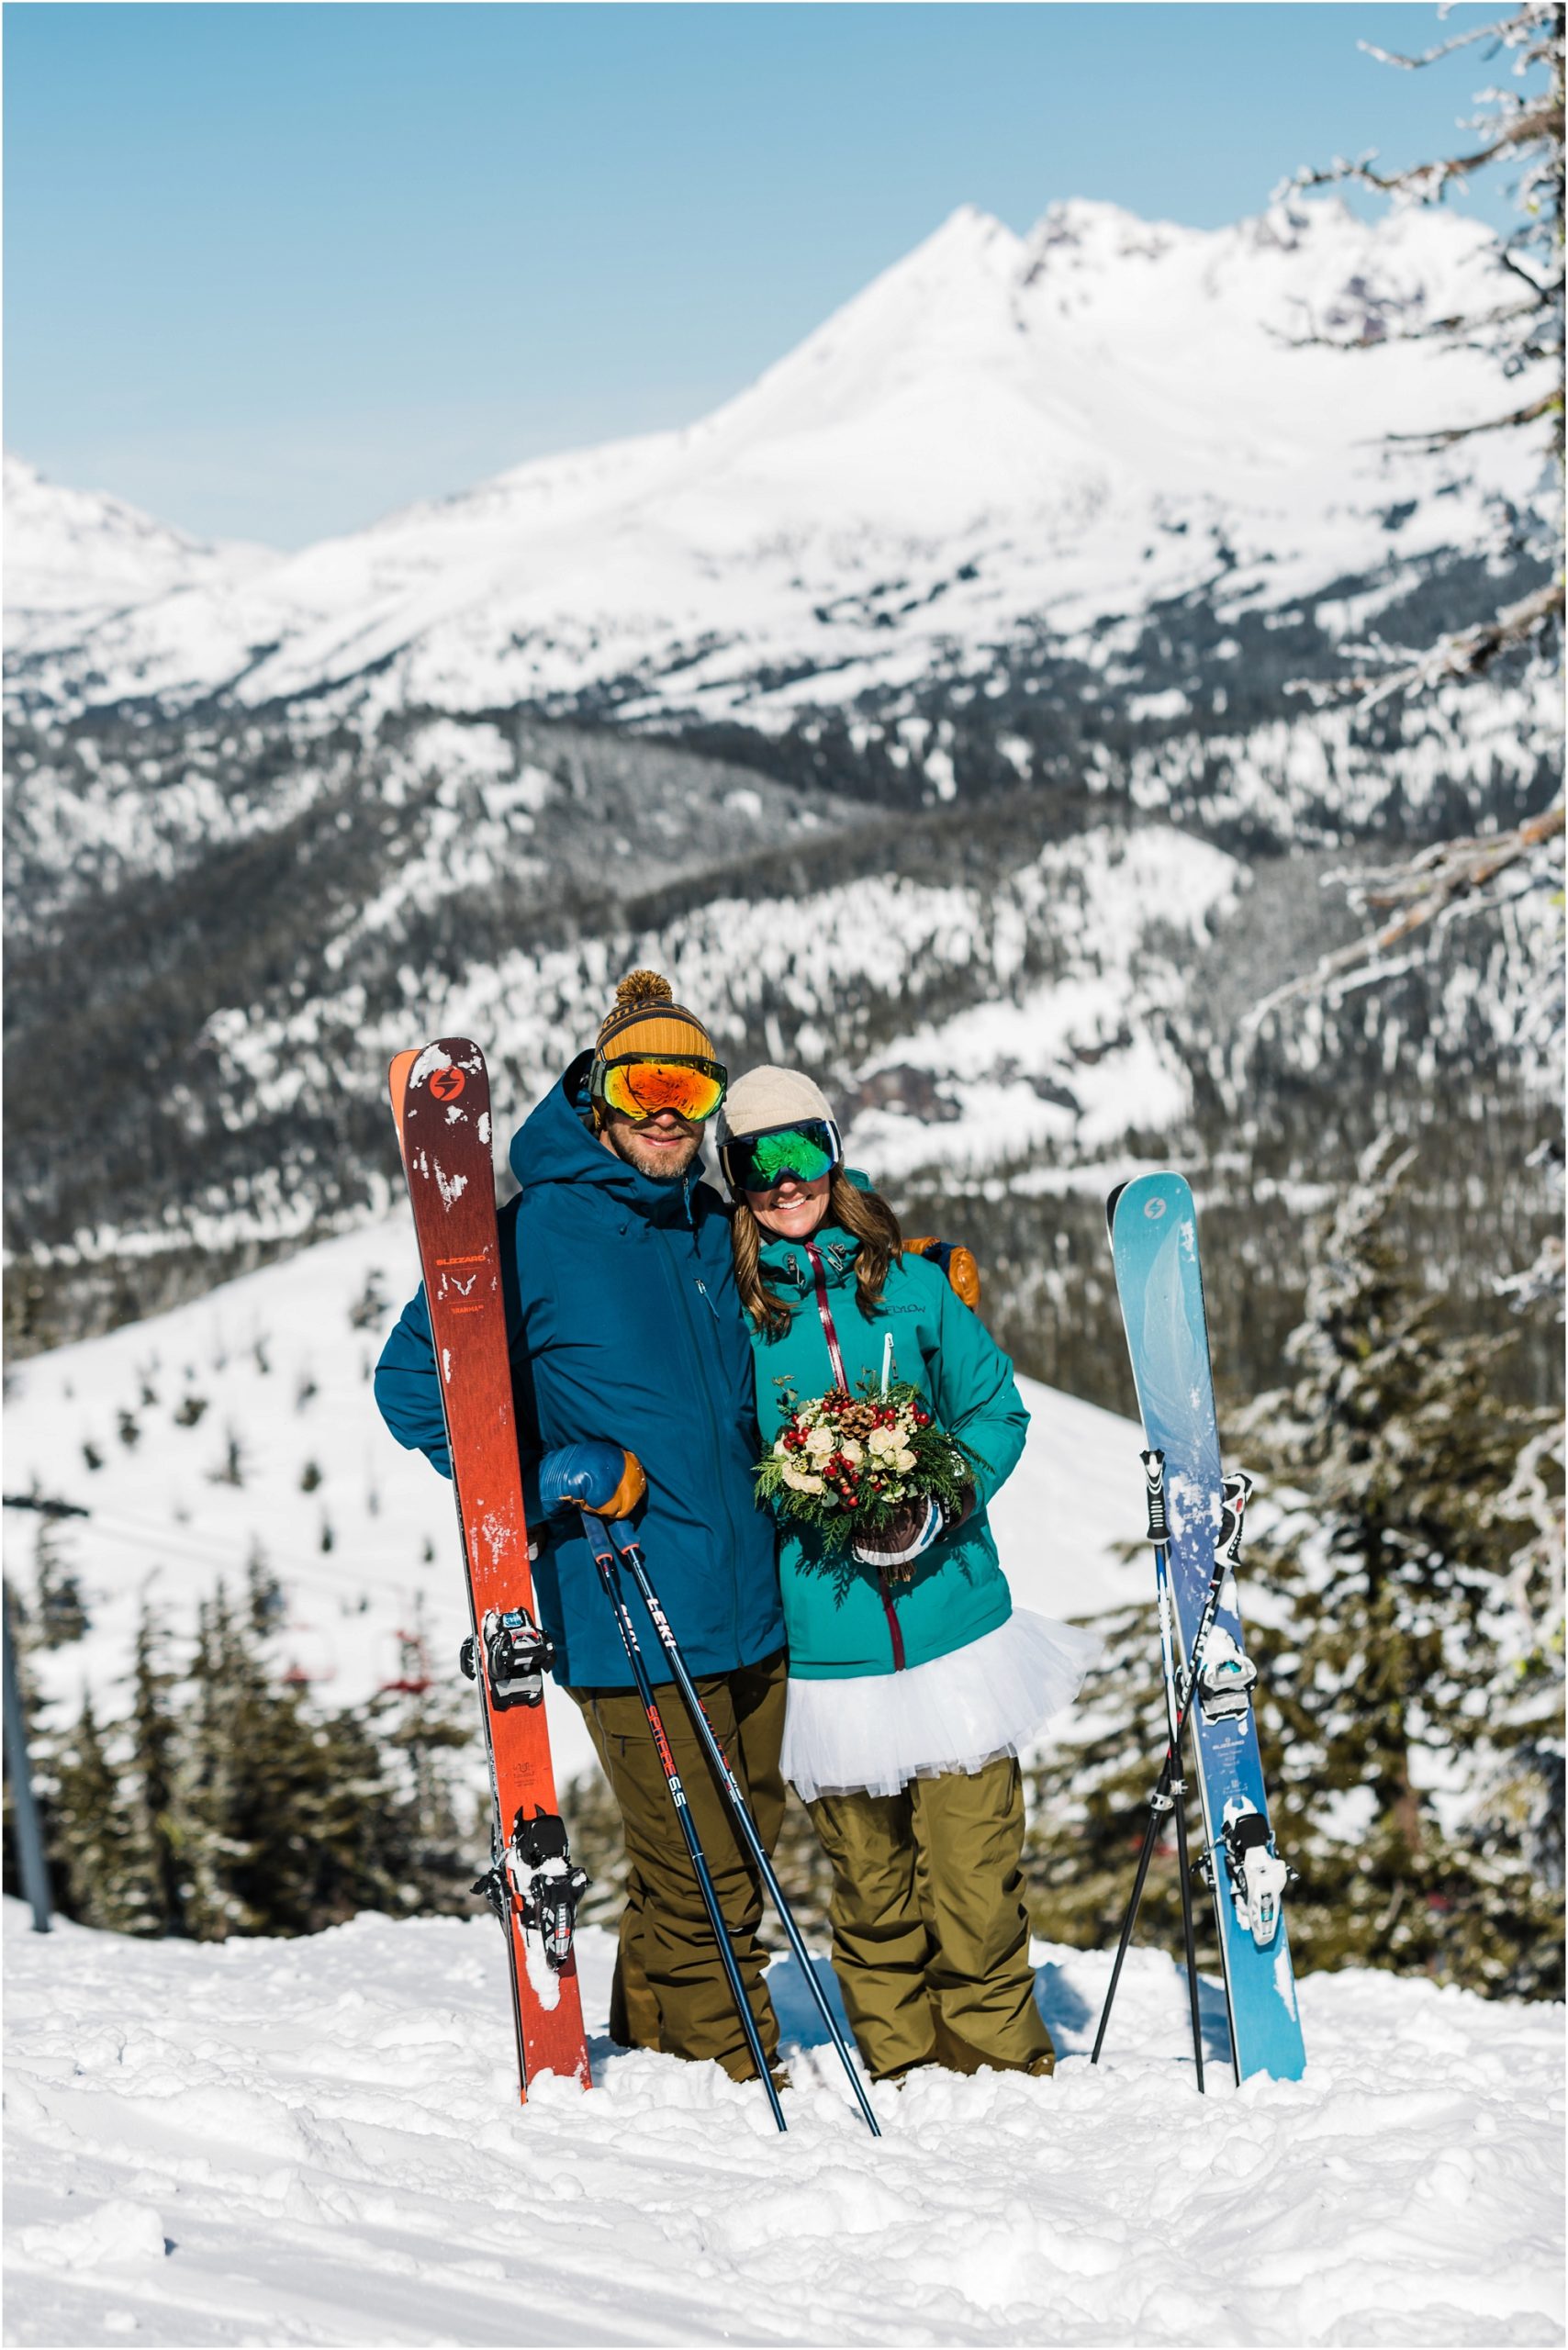 A couple poses with their skis in front of the mountains at their Mt Bachelor ski resort wedding in Bend, Oregon. | Erica Swantek Photography